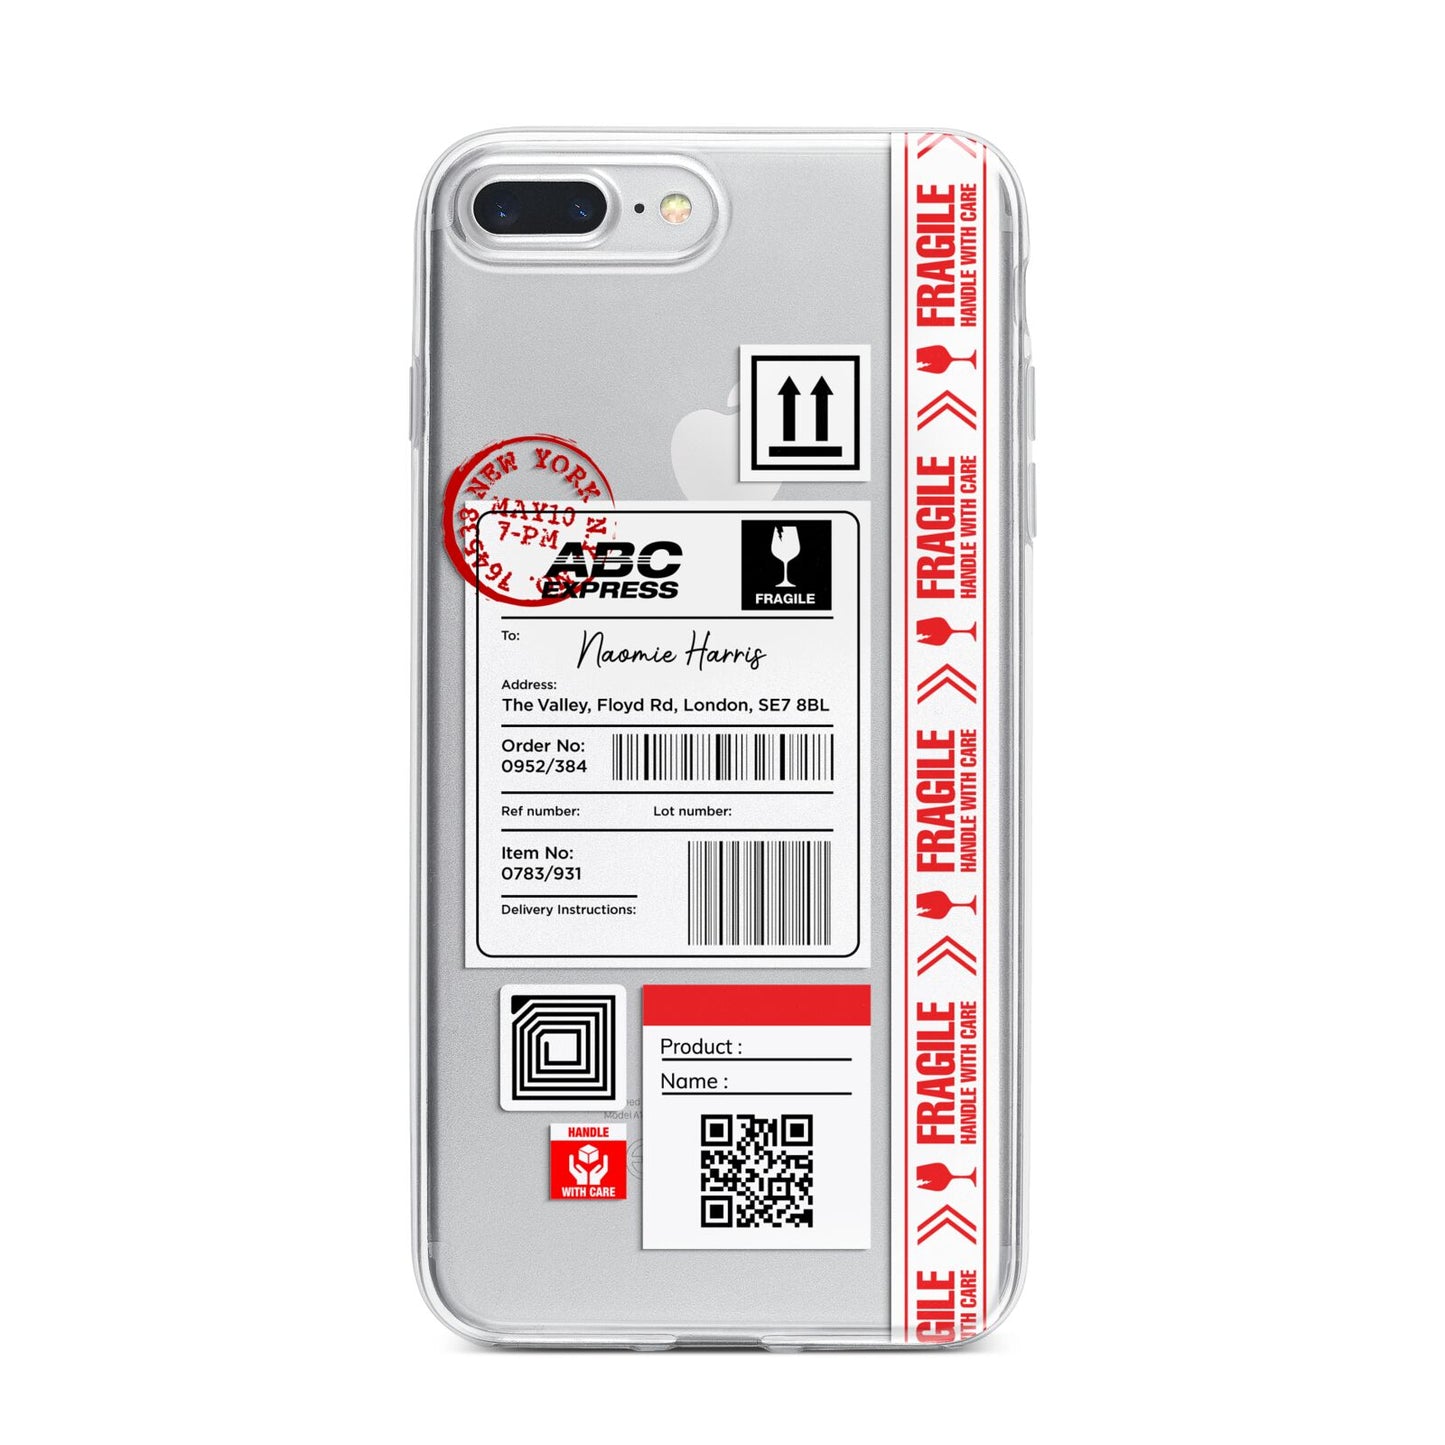 Fragile Delivery Labels with Name iPhone 7 Plus Bumper Case on Silver iPhone